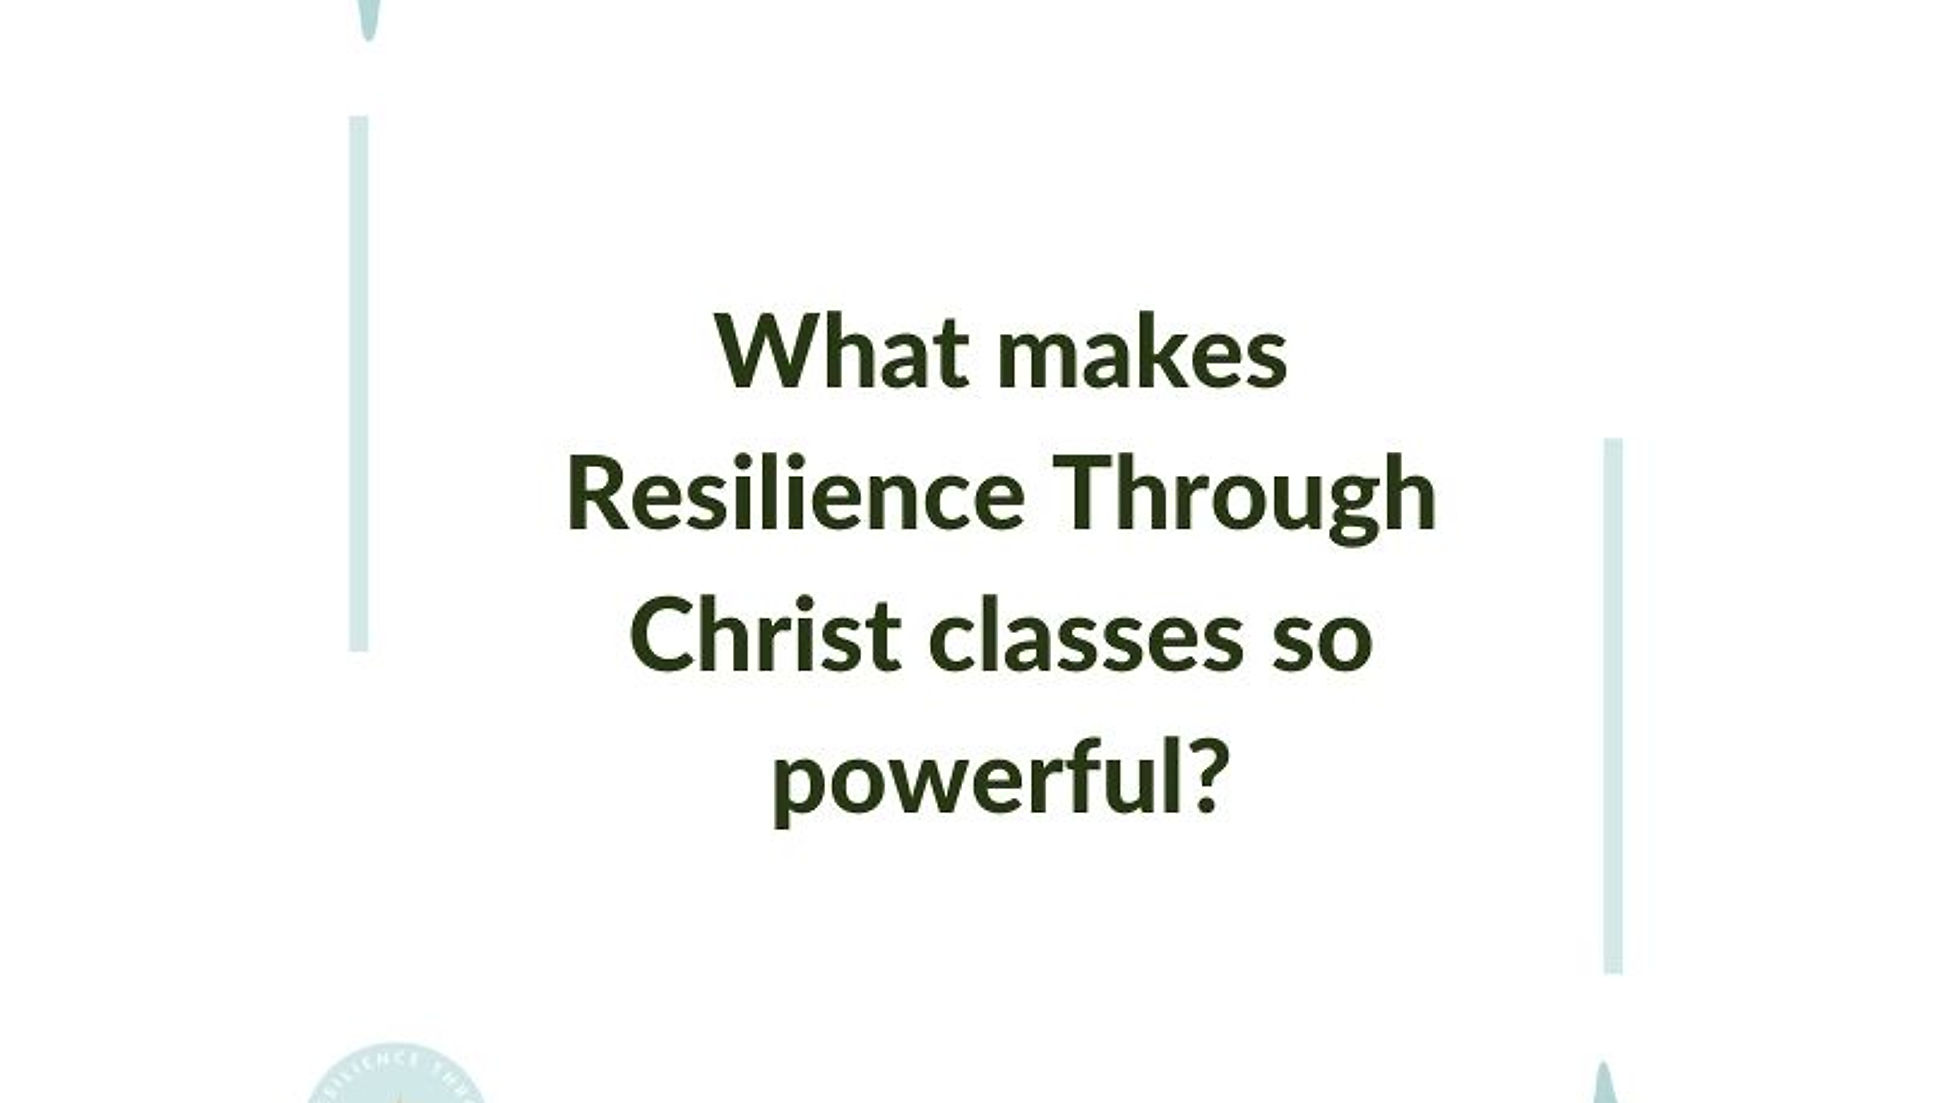 What makes RTC classes so powerful?